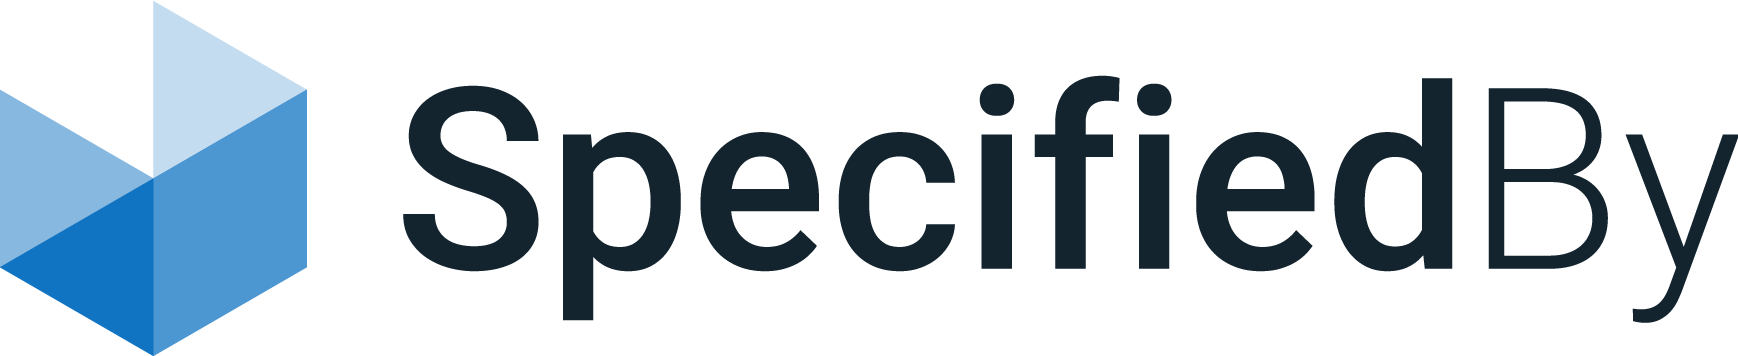 SpecifiedBy logo